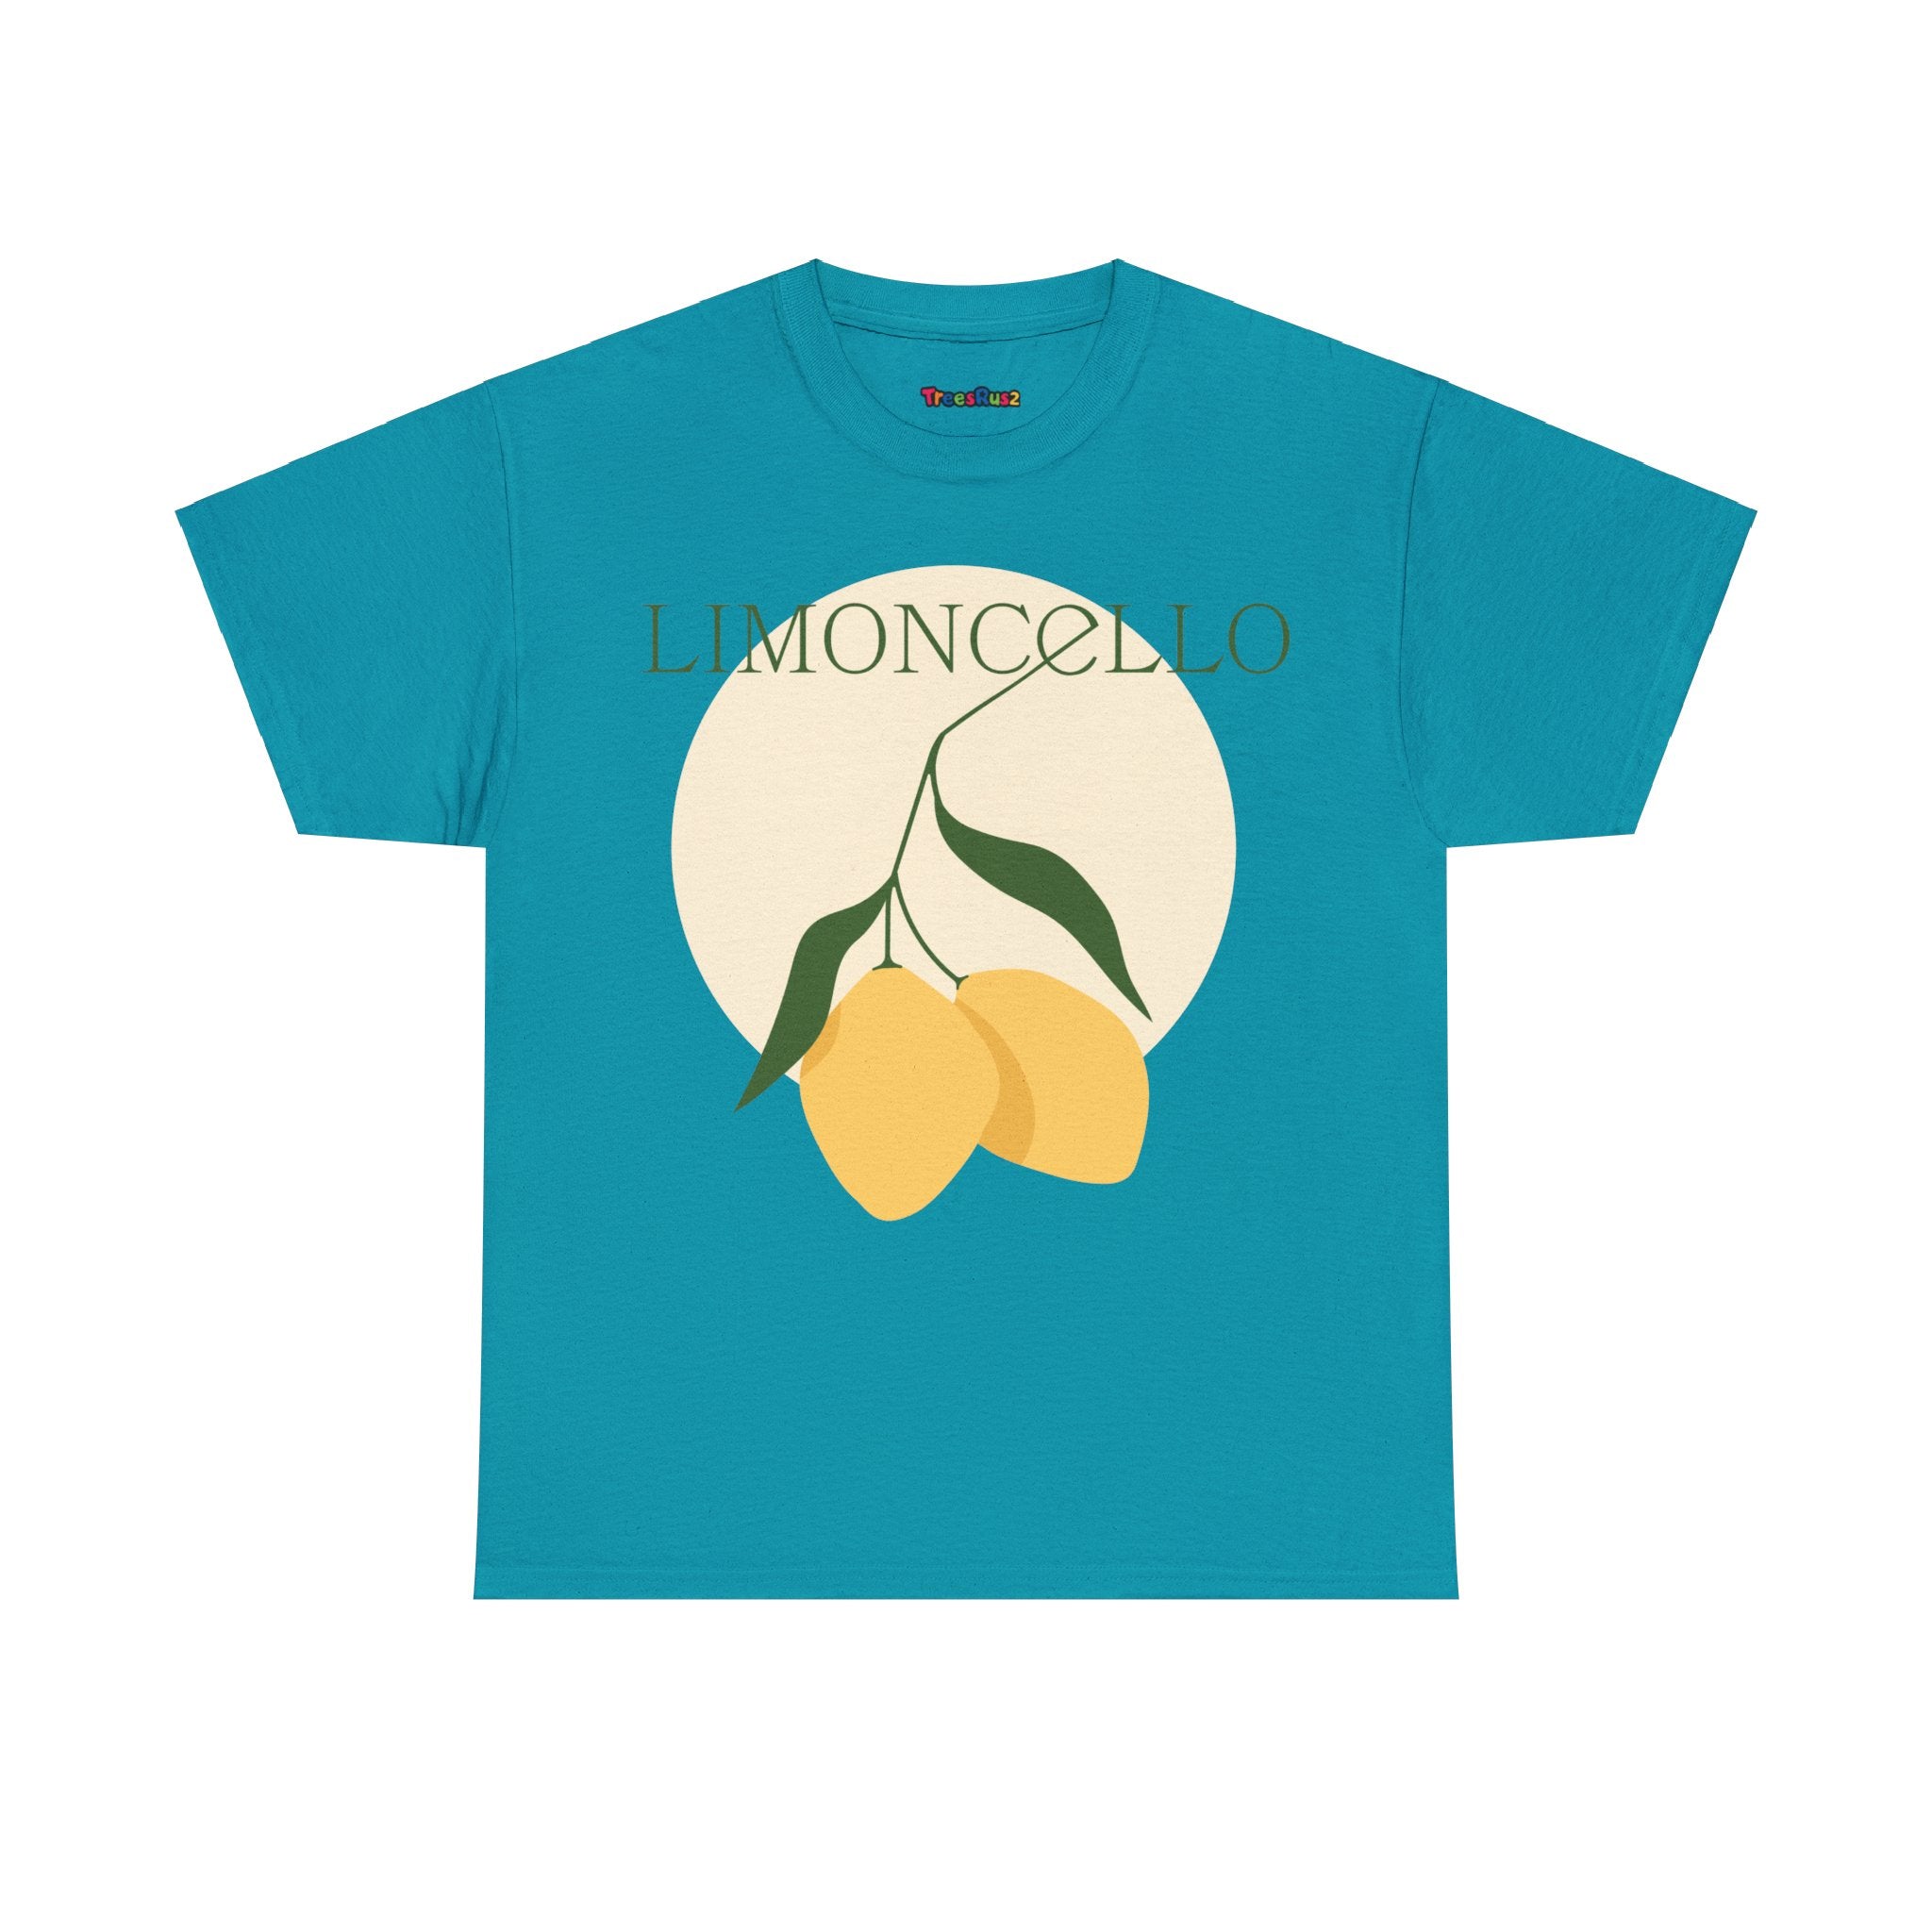 Limoncello T-Shirt: Zesty Style for Citrus Lovers 🍋 - TRU2 Clothing